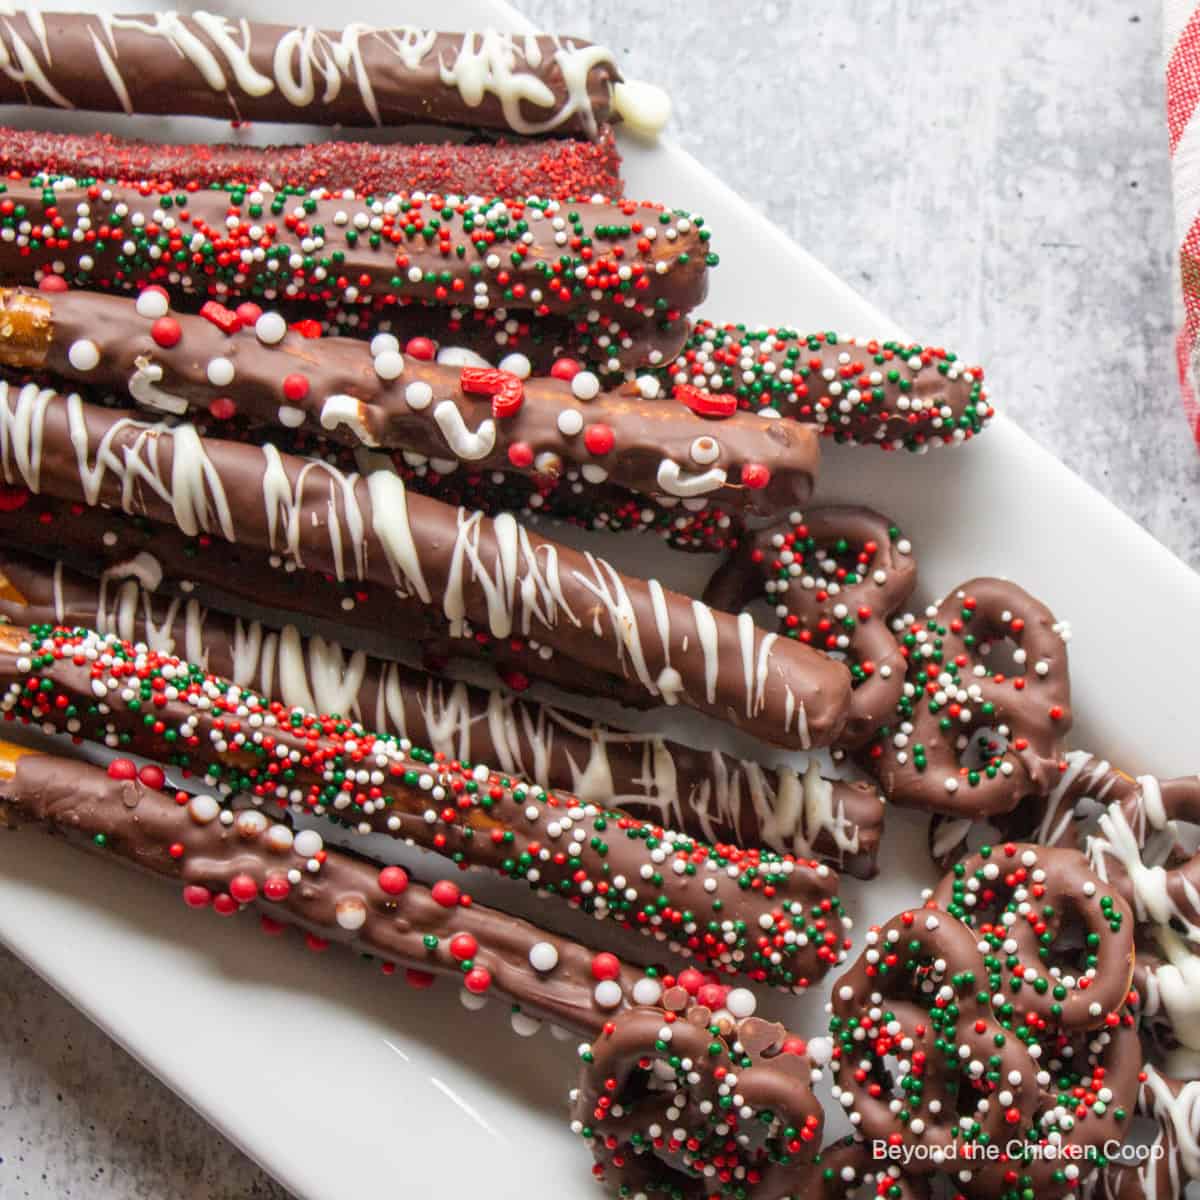 Pretzels with chocolate and sprinkles.